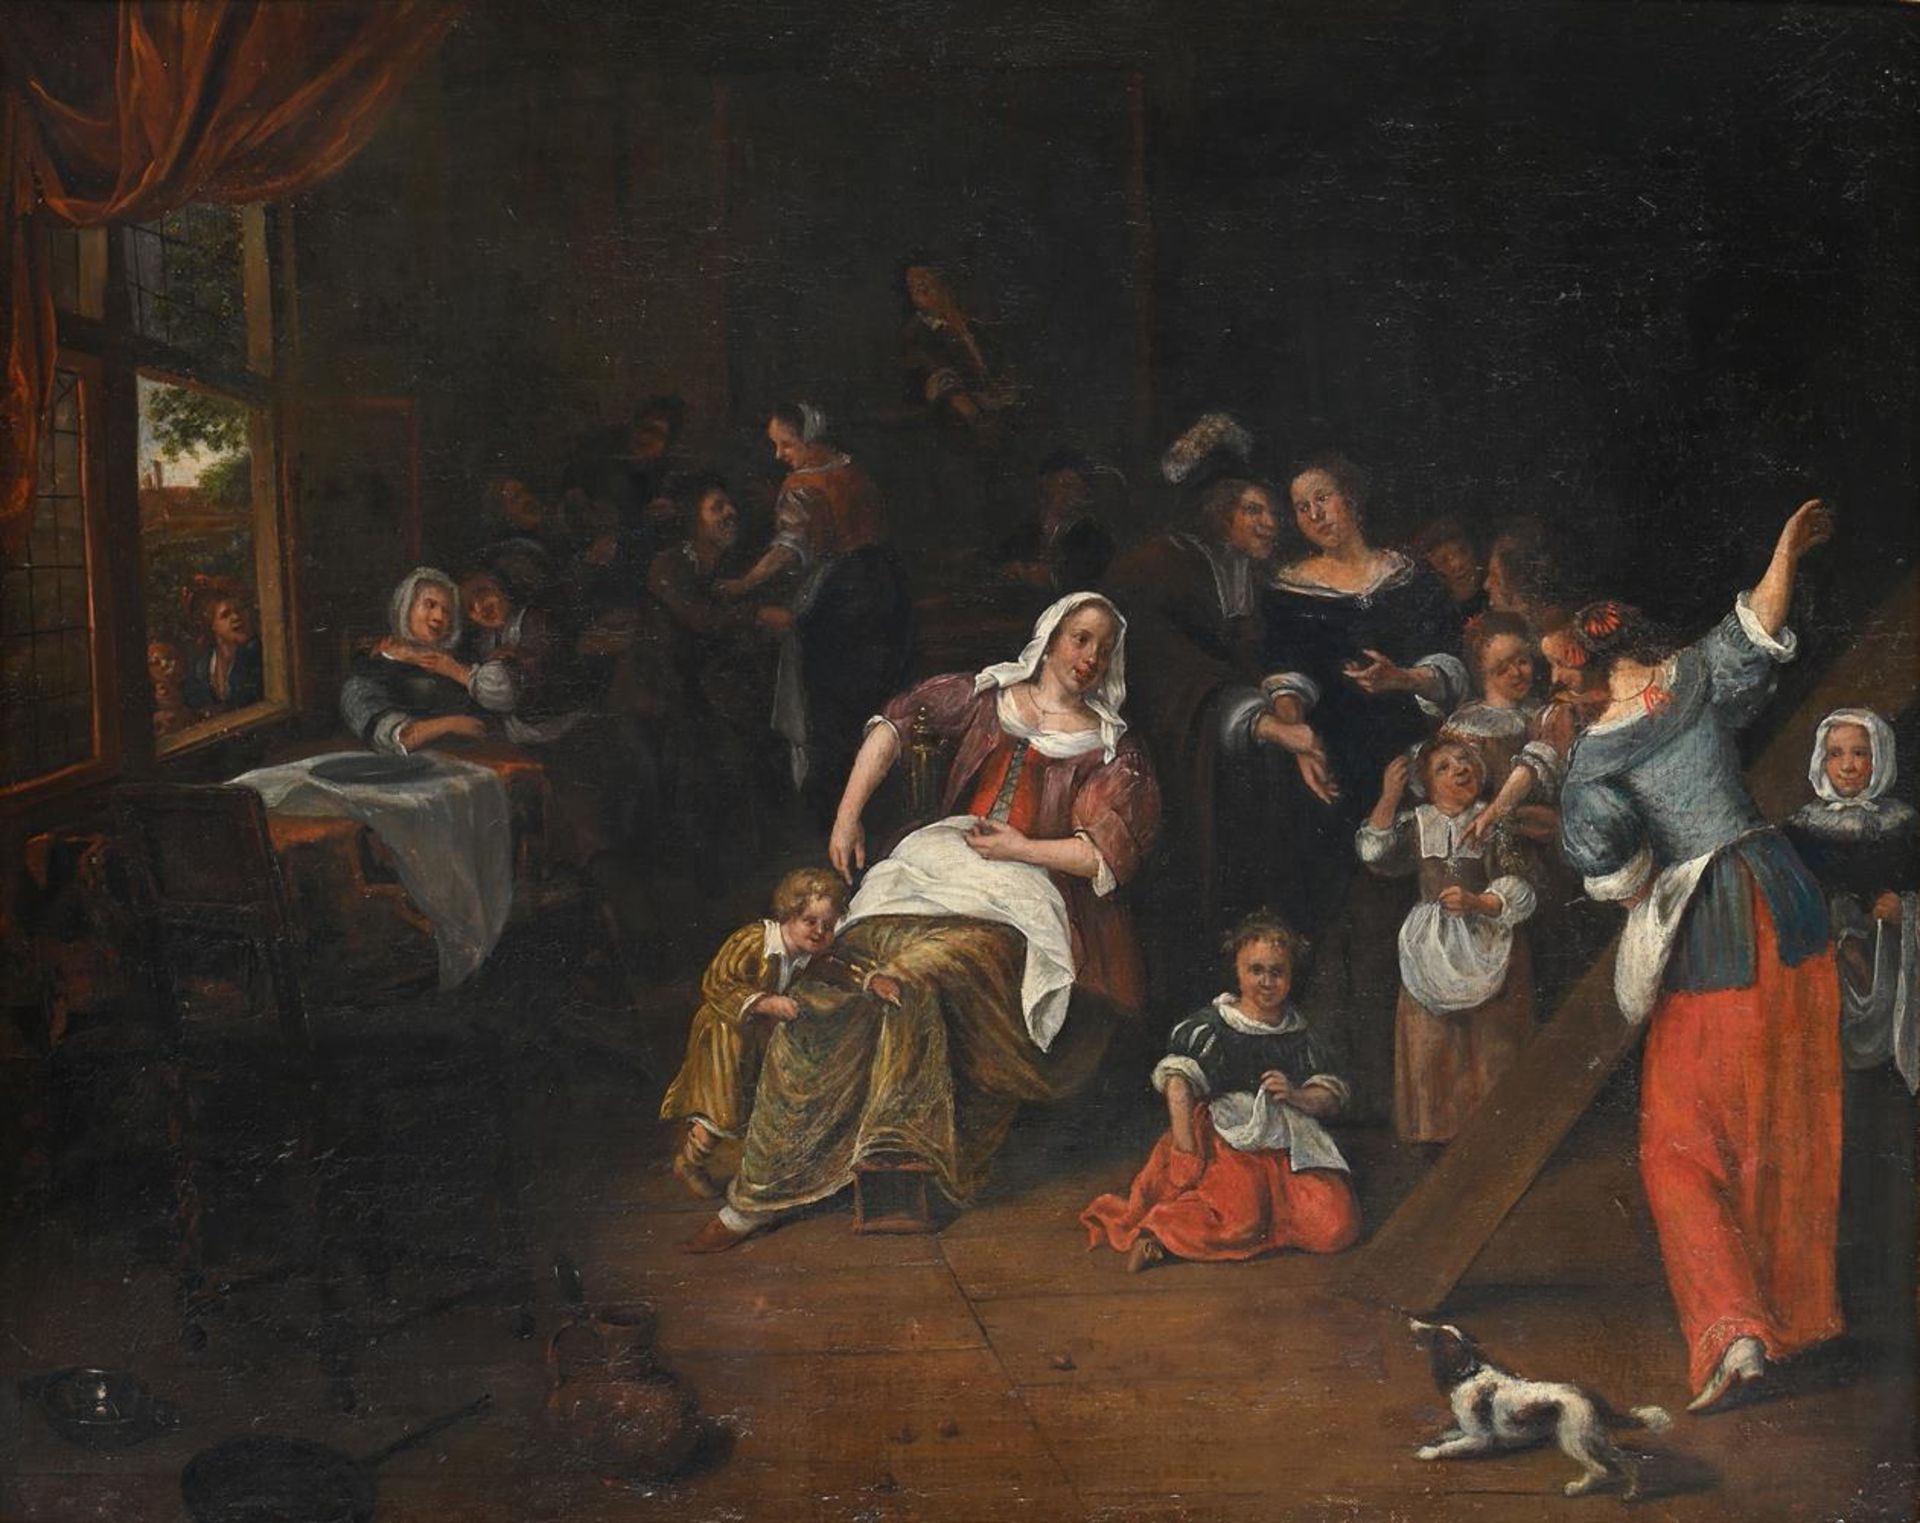 FOLLOWER OF JAN STEEN, INTERIOR SCENE WITH FIGURES - Image 2 of 3